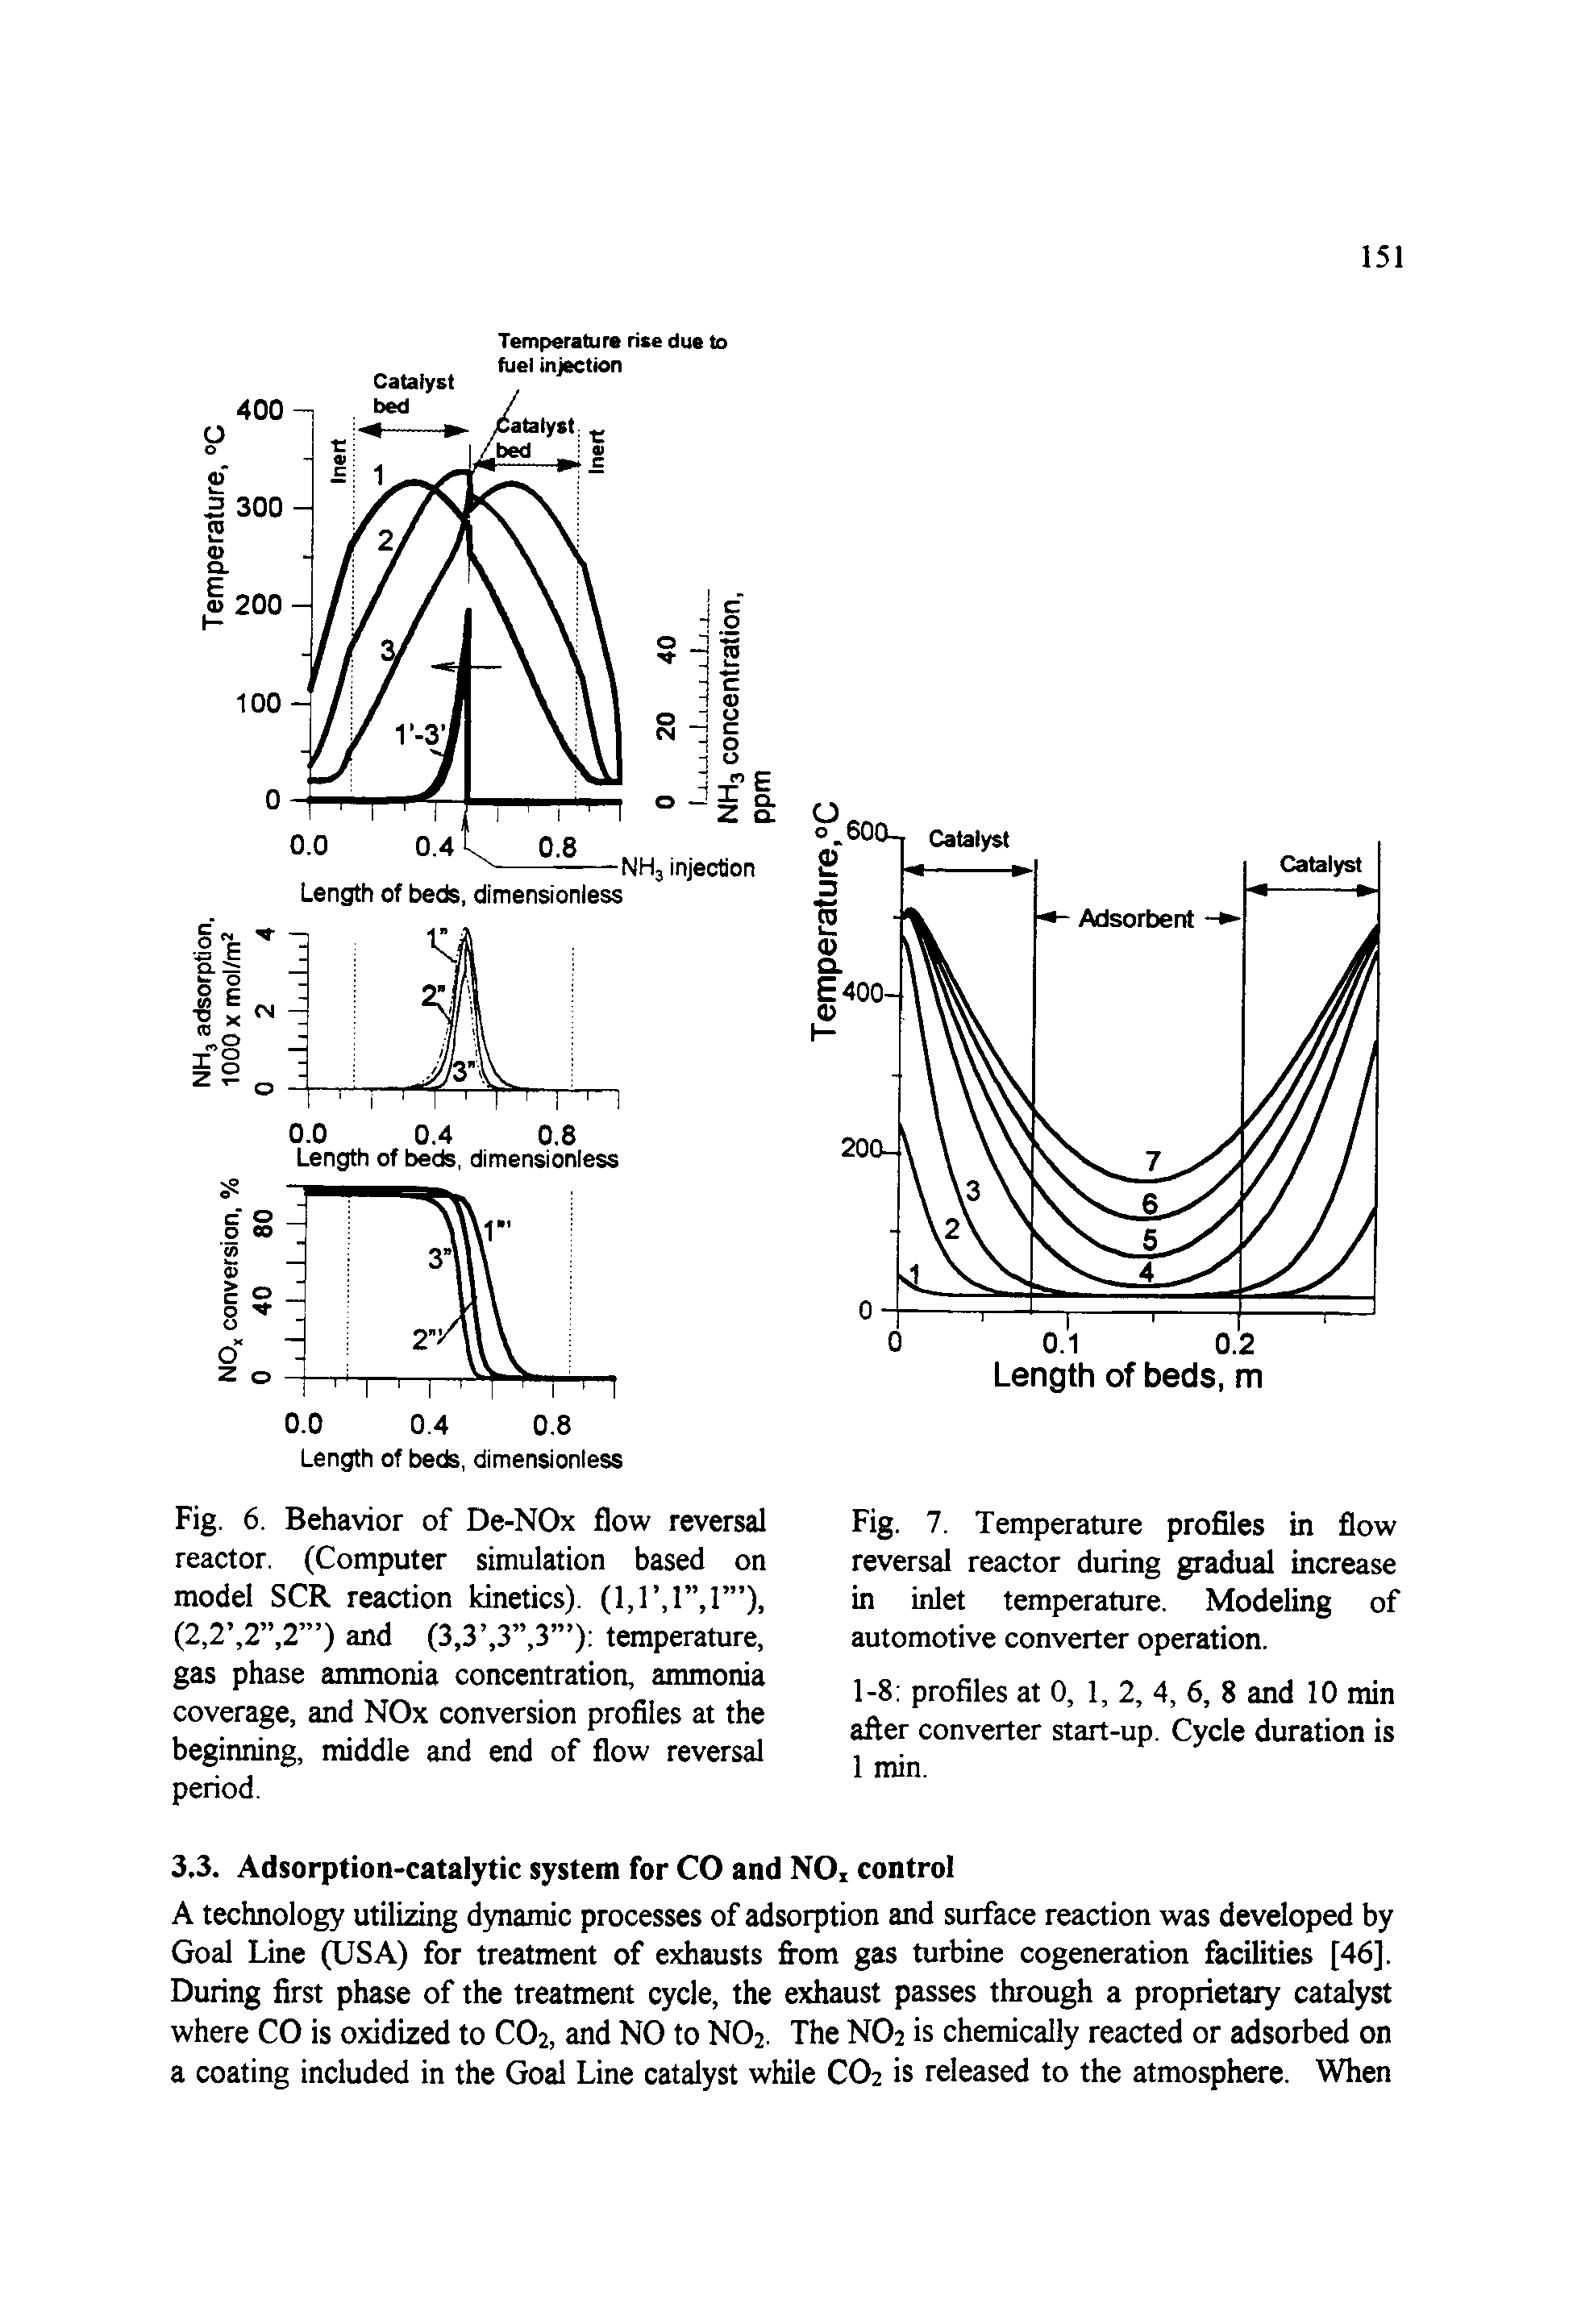 Fig. 6. Behavior of De-NOx flow reversal reactor. (Computer simulation based on model SCR reaction kinetics). (I, , , ), (2,2 ,2 ,2 ) and (3,3 ,3 ,3 ) temperature, gas phase ammonia concentration, ammonia coverage, and NOx conversion profiles at the beginning, middle and end of flow reversal period.